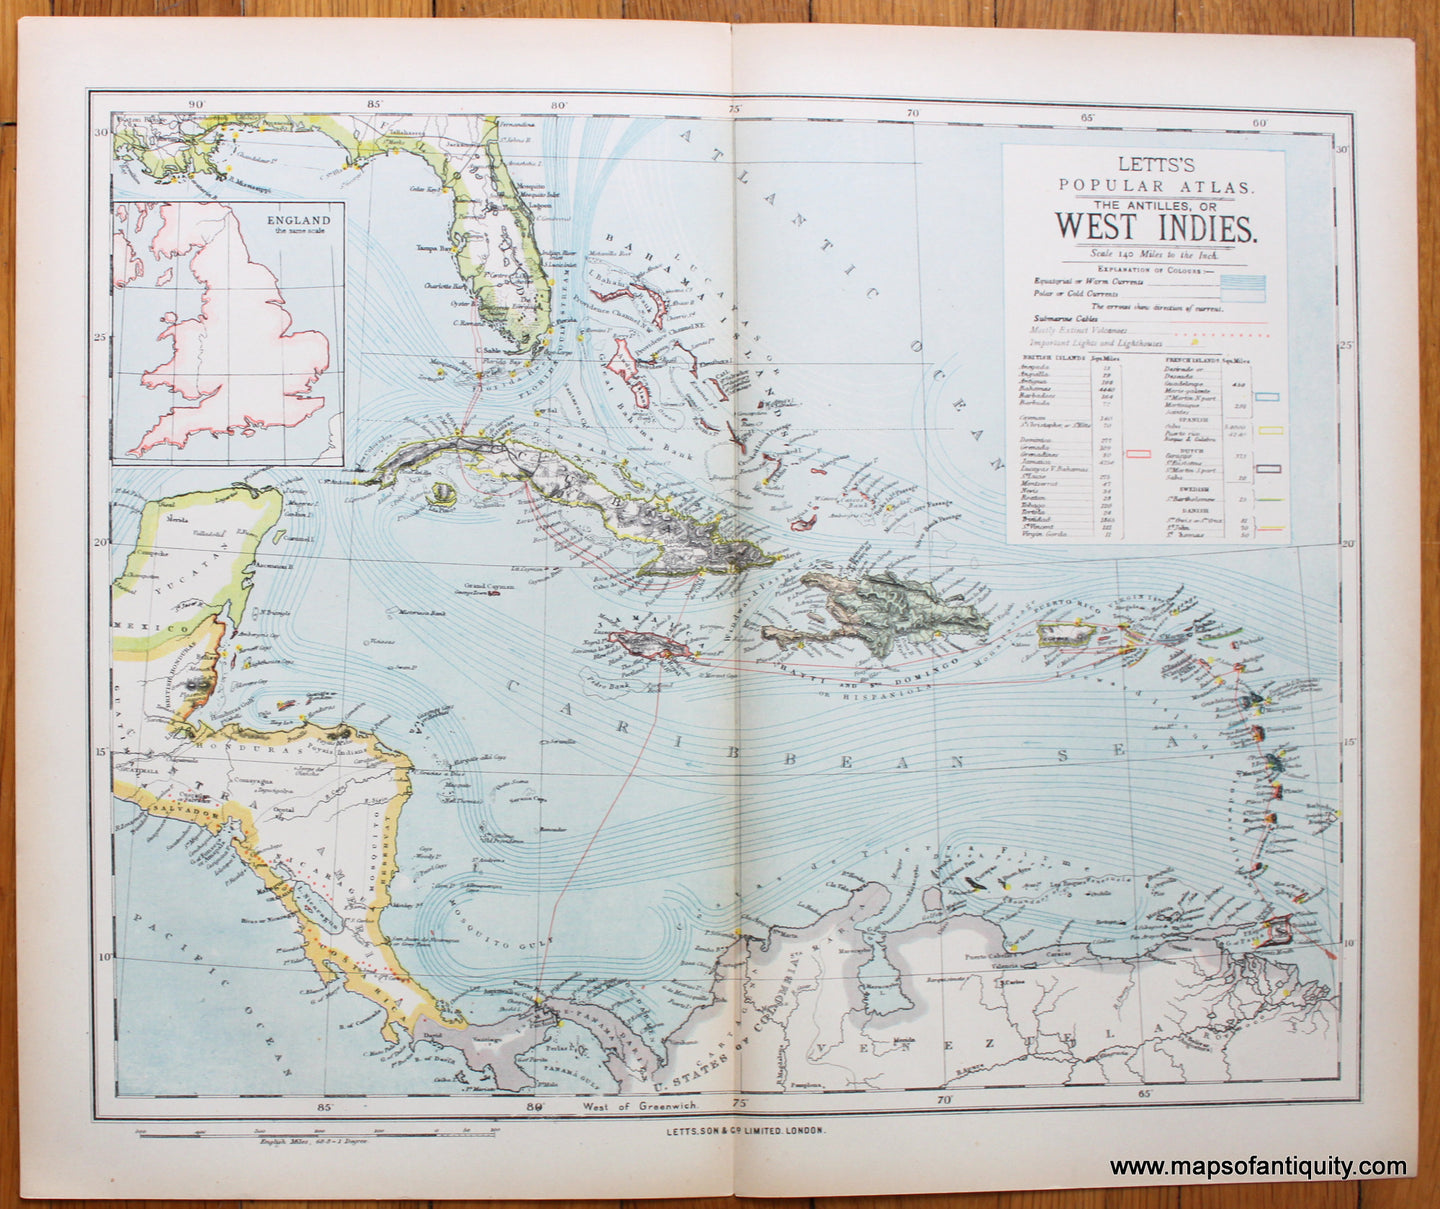 Printed-Color-Antique-Map-The-Antilles-or-West-Indies-**********-Caribbean-Caribbean-1883-Letts-Maps-Of-Antiquity